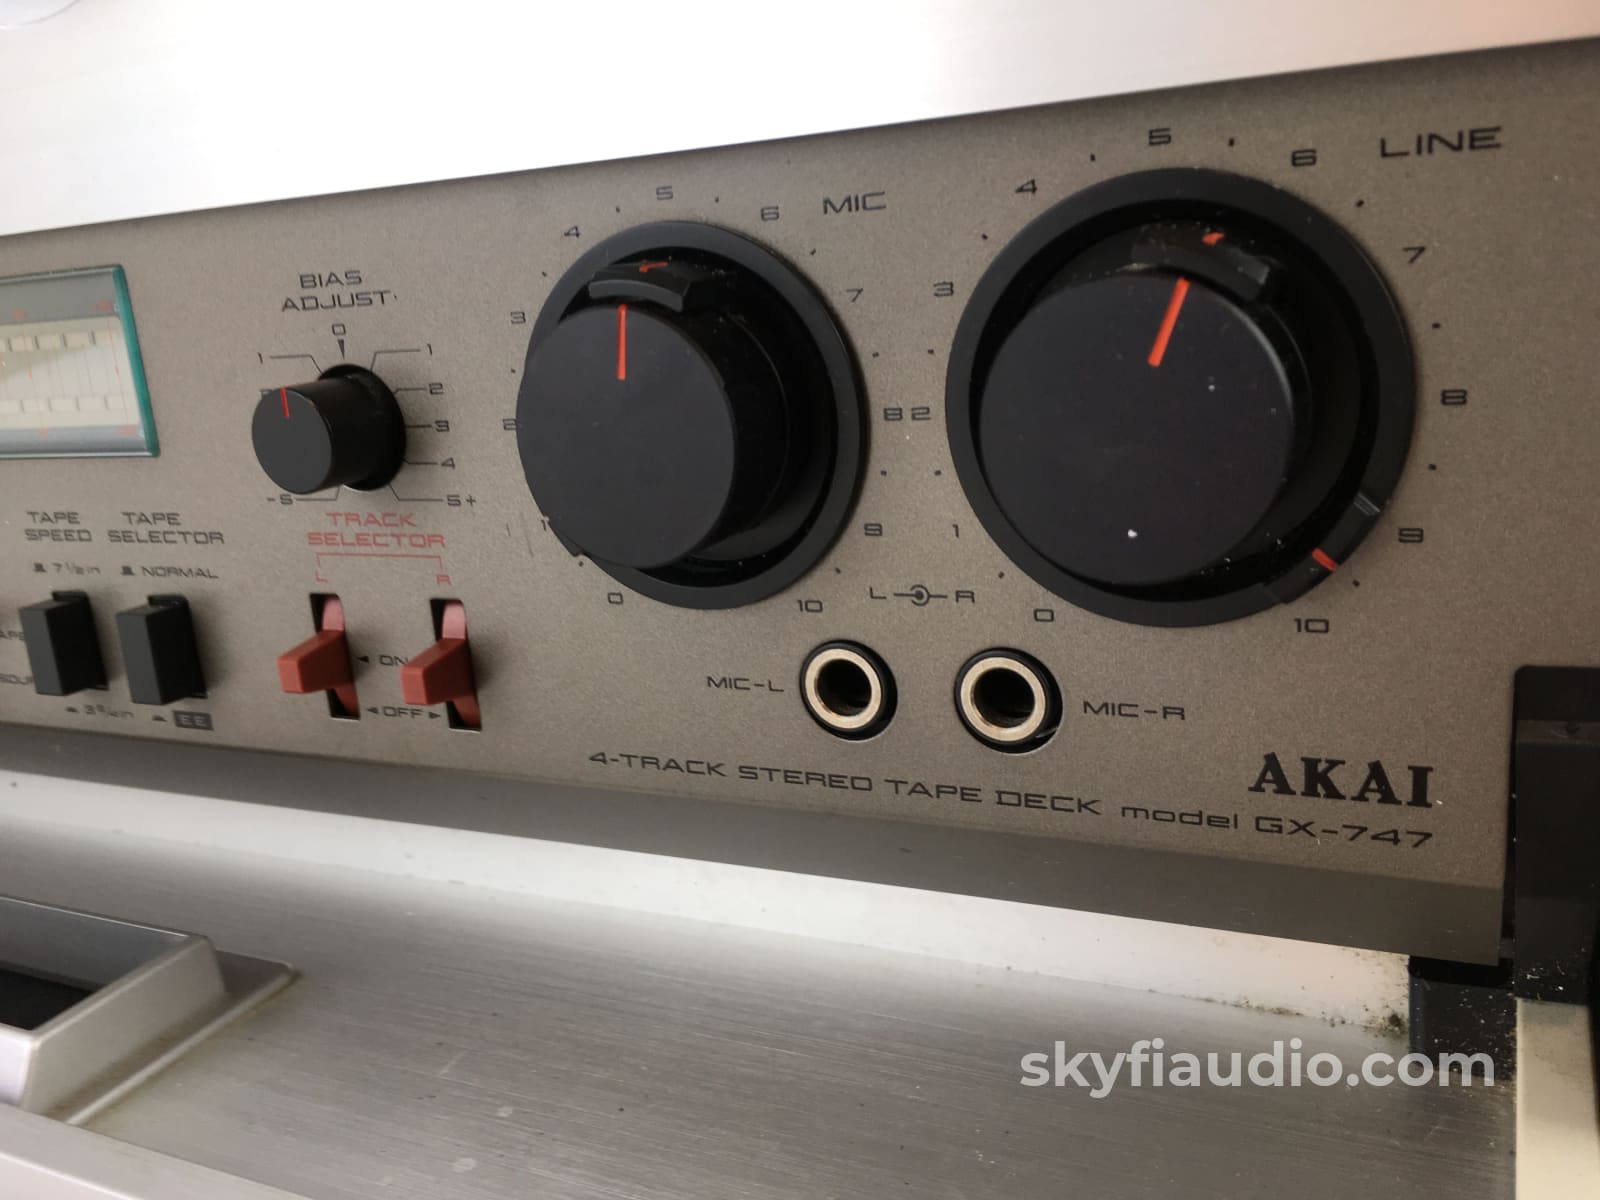 Akai GX-747 Reel-To-Reel Tape Recorder Daz Content by GMArtworks